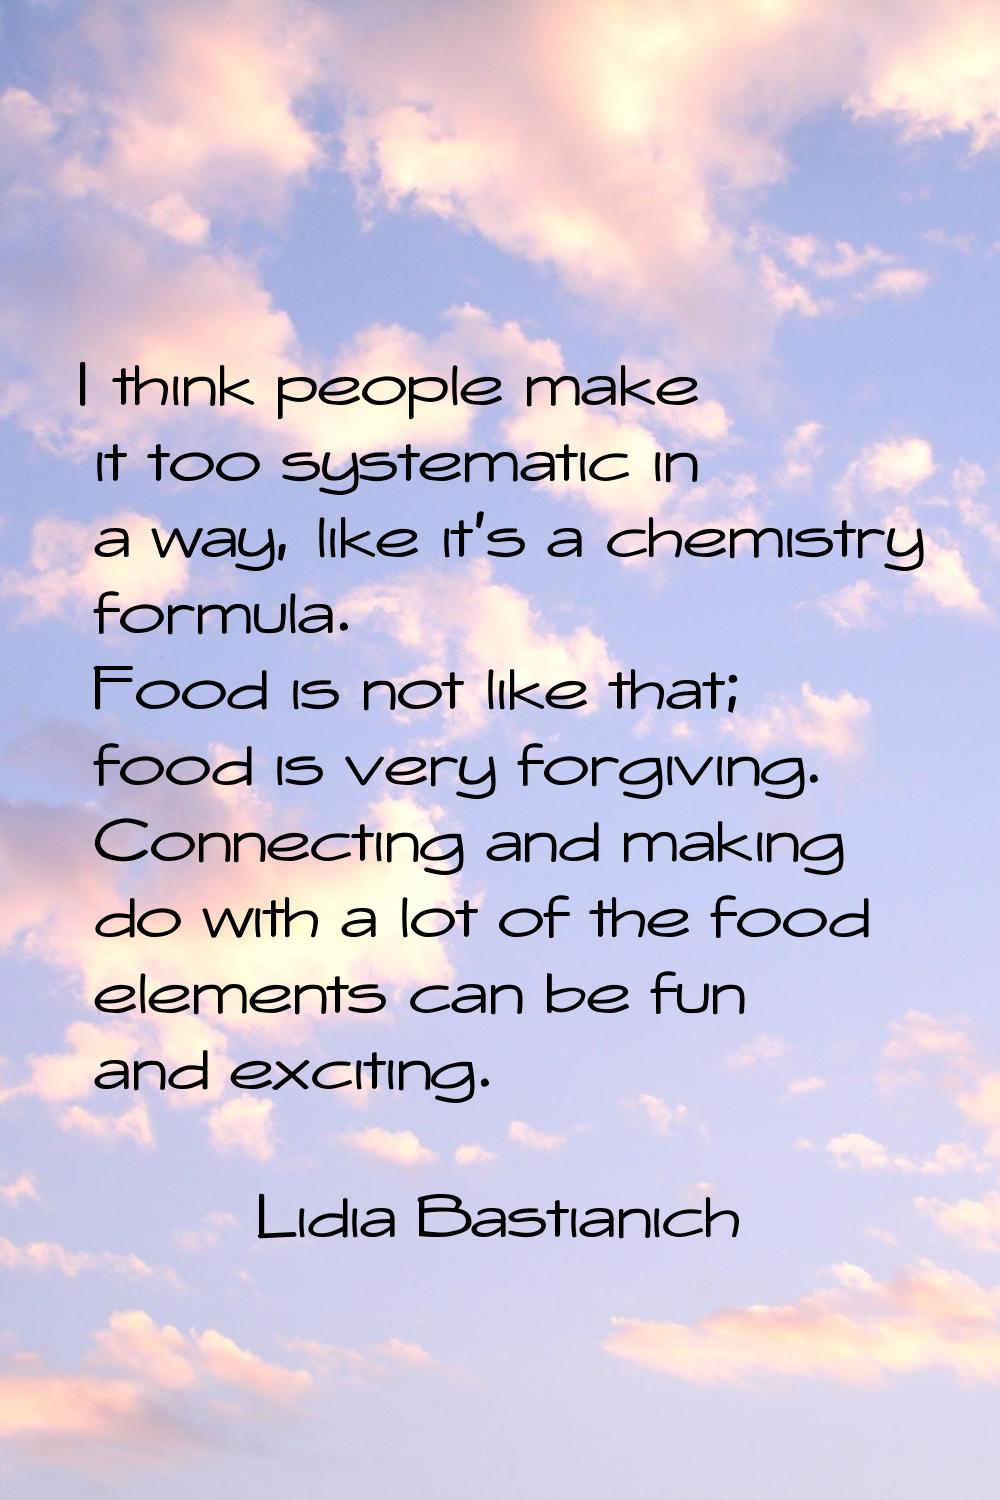 I think people make it too systematic in a way, like it's a chemistry formula. Food is not like tha